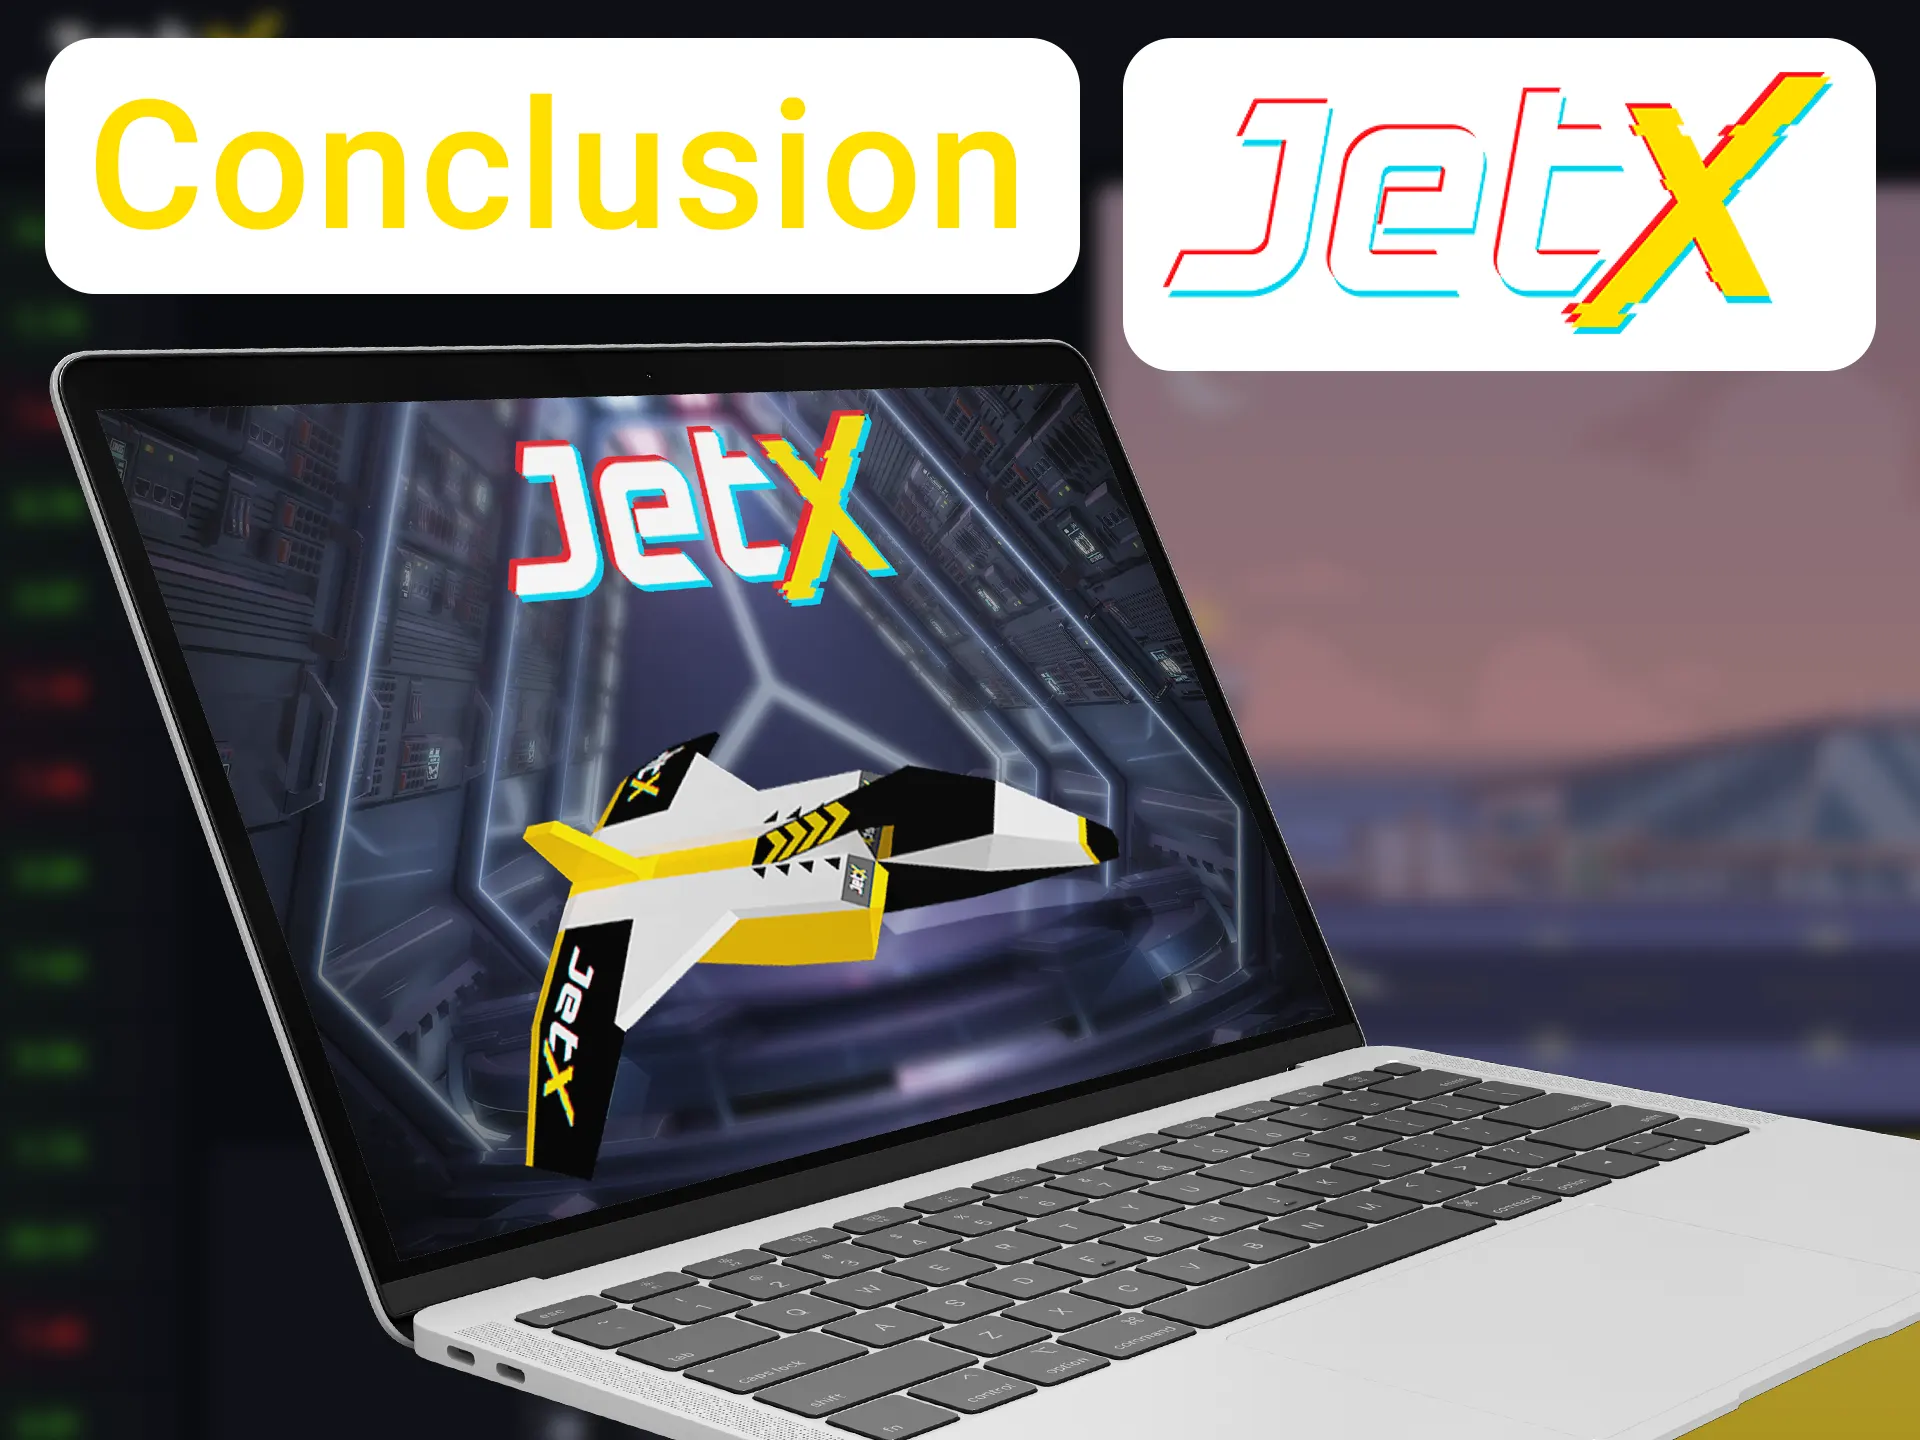 The JetX game is a great way to win money.